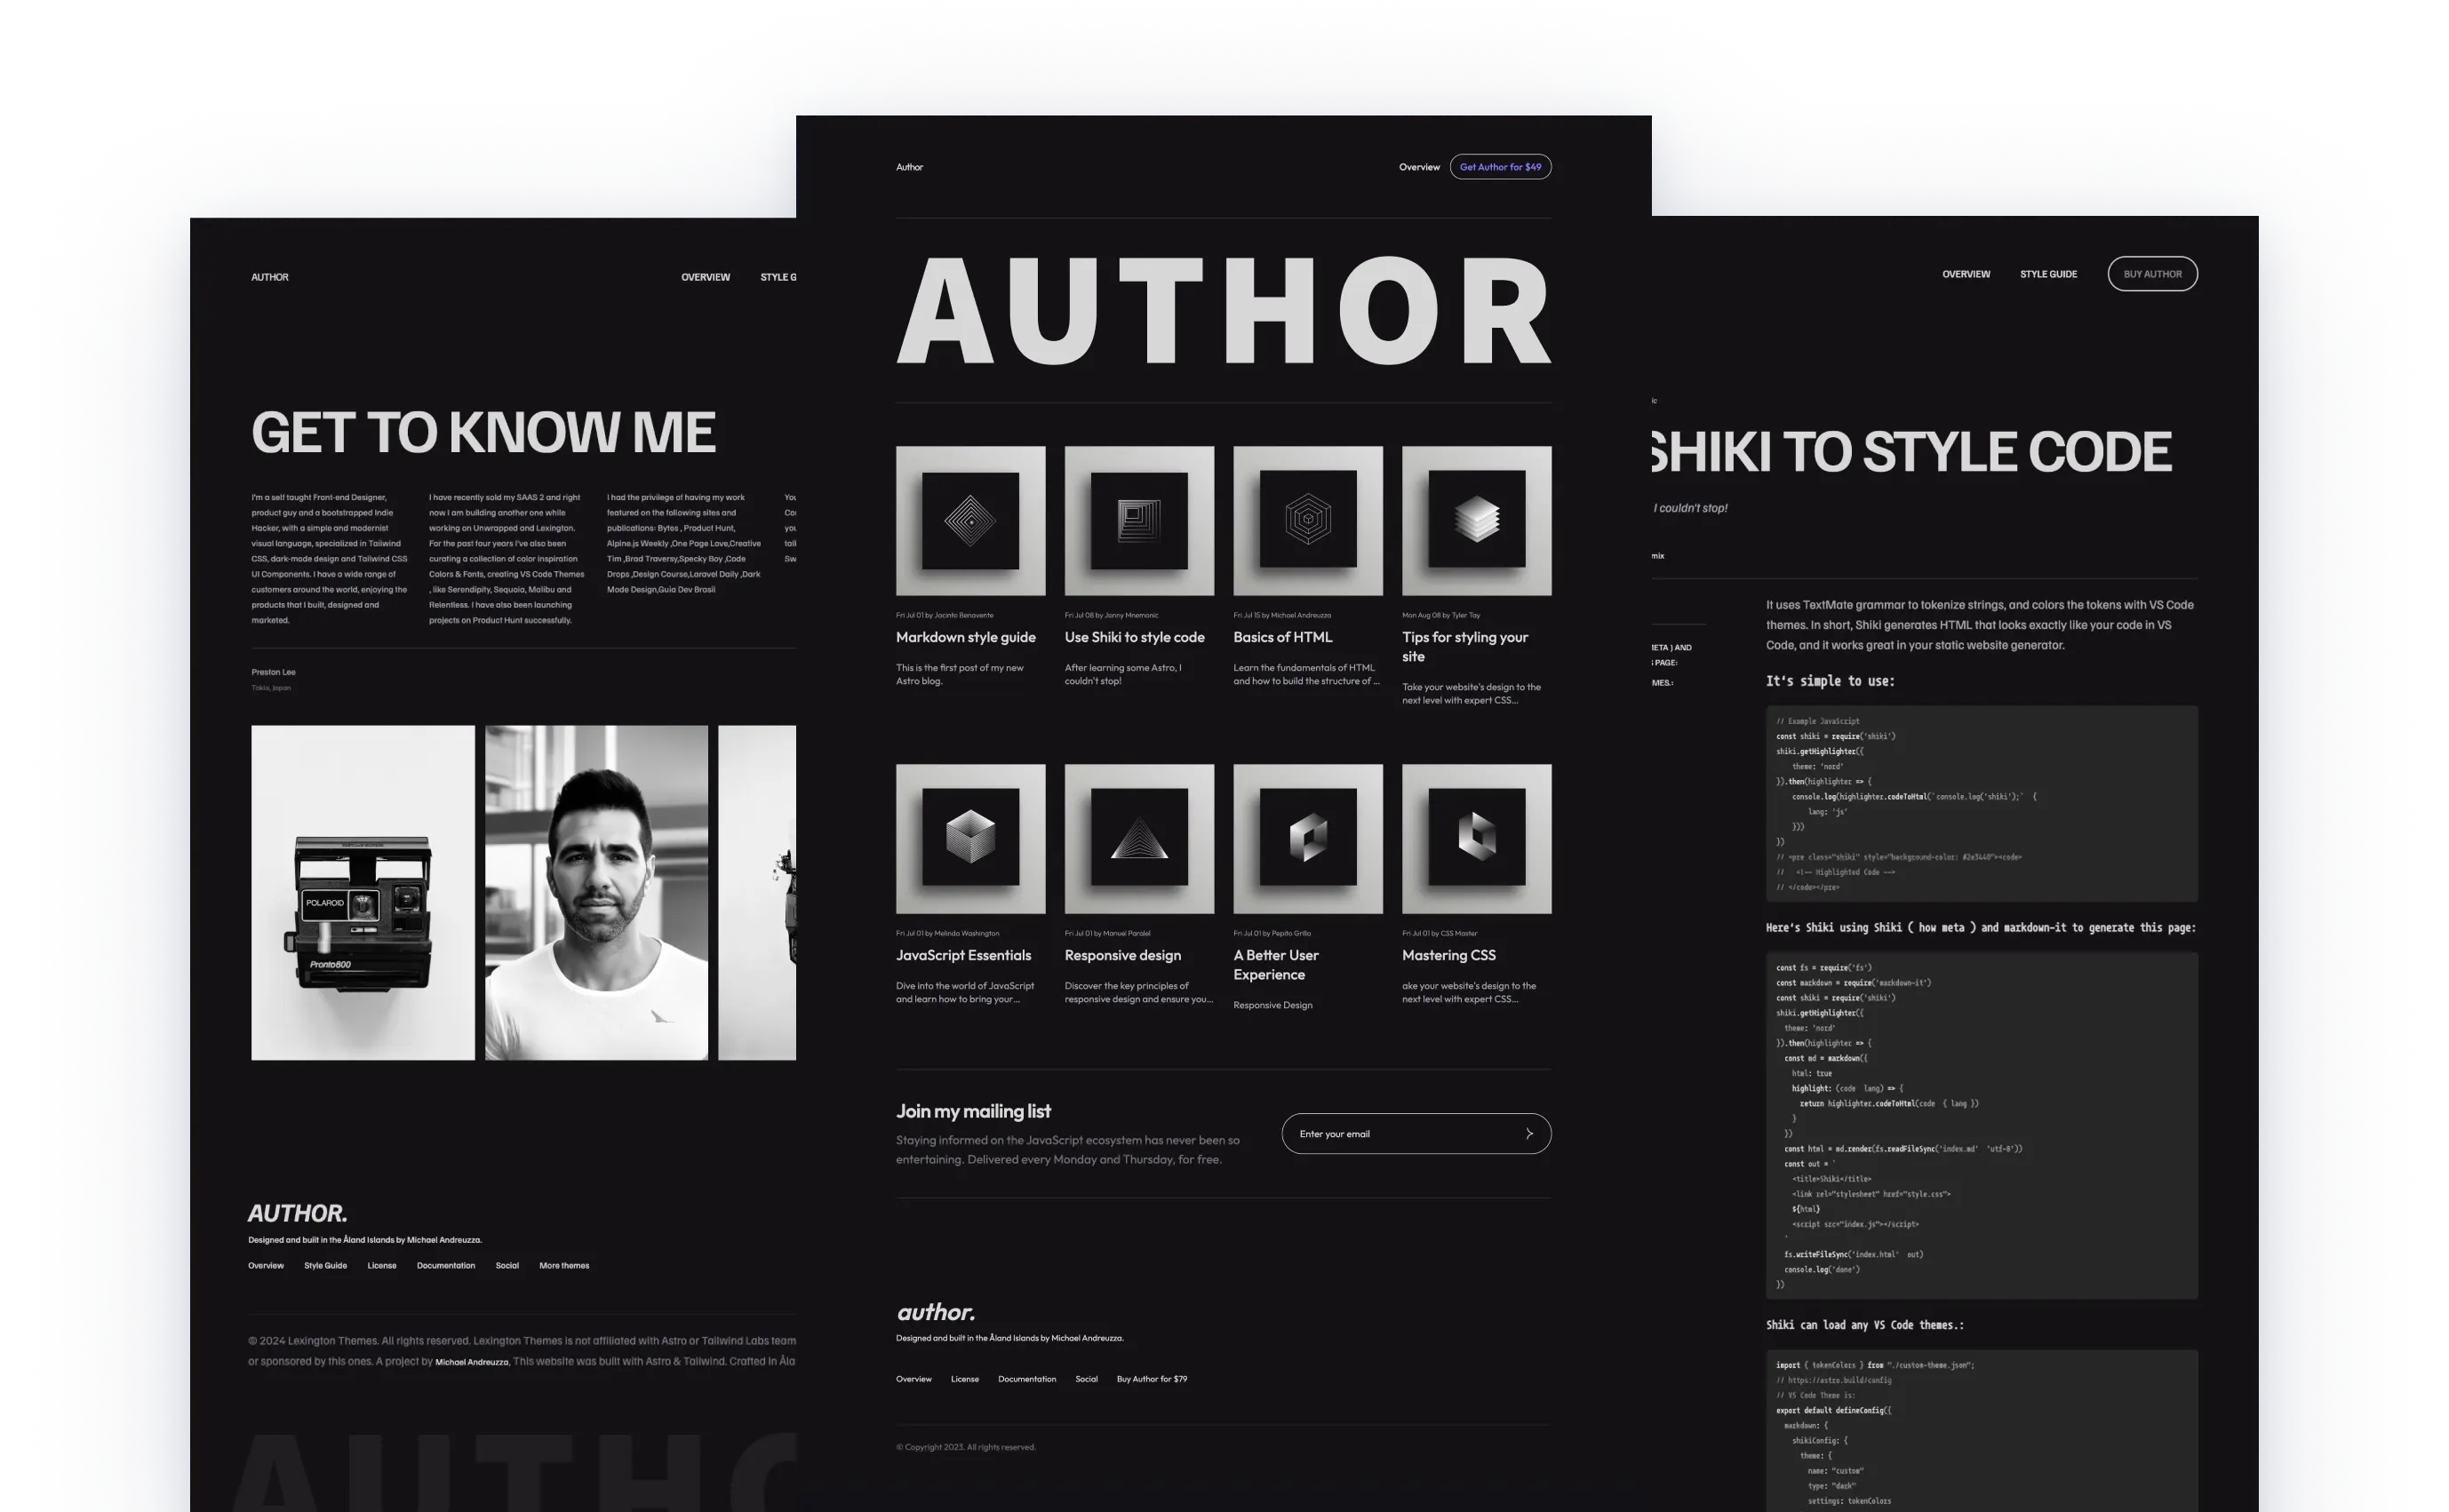 Author theme for blogging with a dark mode design, featuring markdown style guide, coding articles, and a 'Know Me' section with personal photos. The layout includes a grid of article previews with monochrome images and a call to action to join the mailing list.